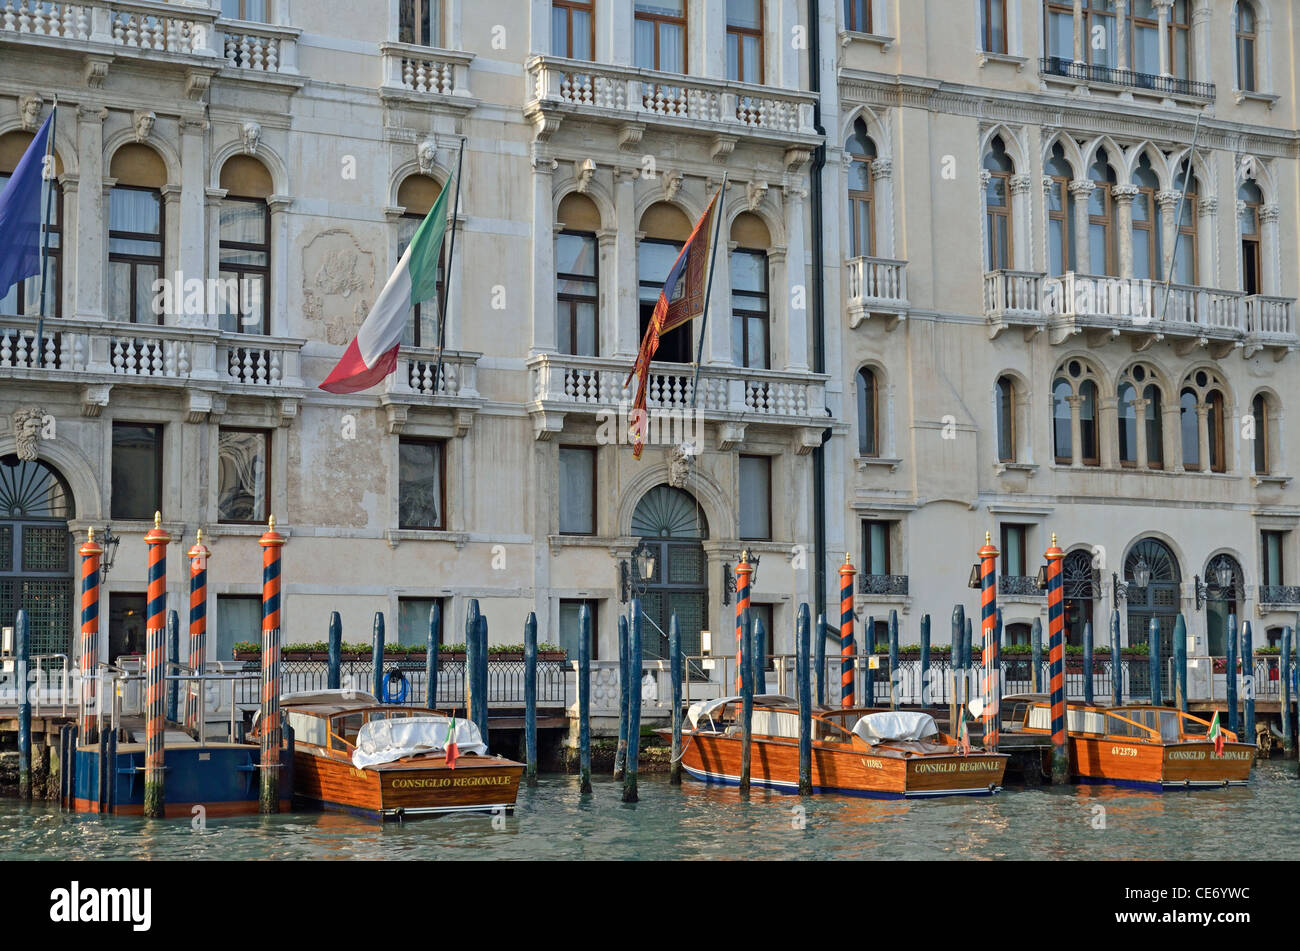 Boats at the Regional Council buildings piers in Venice, Italy Stock Photo